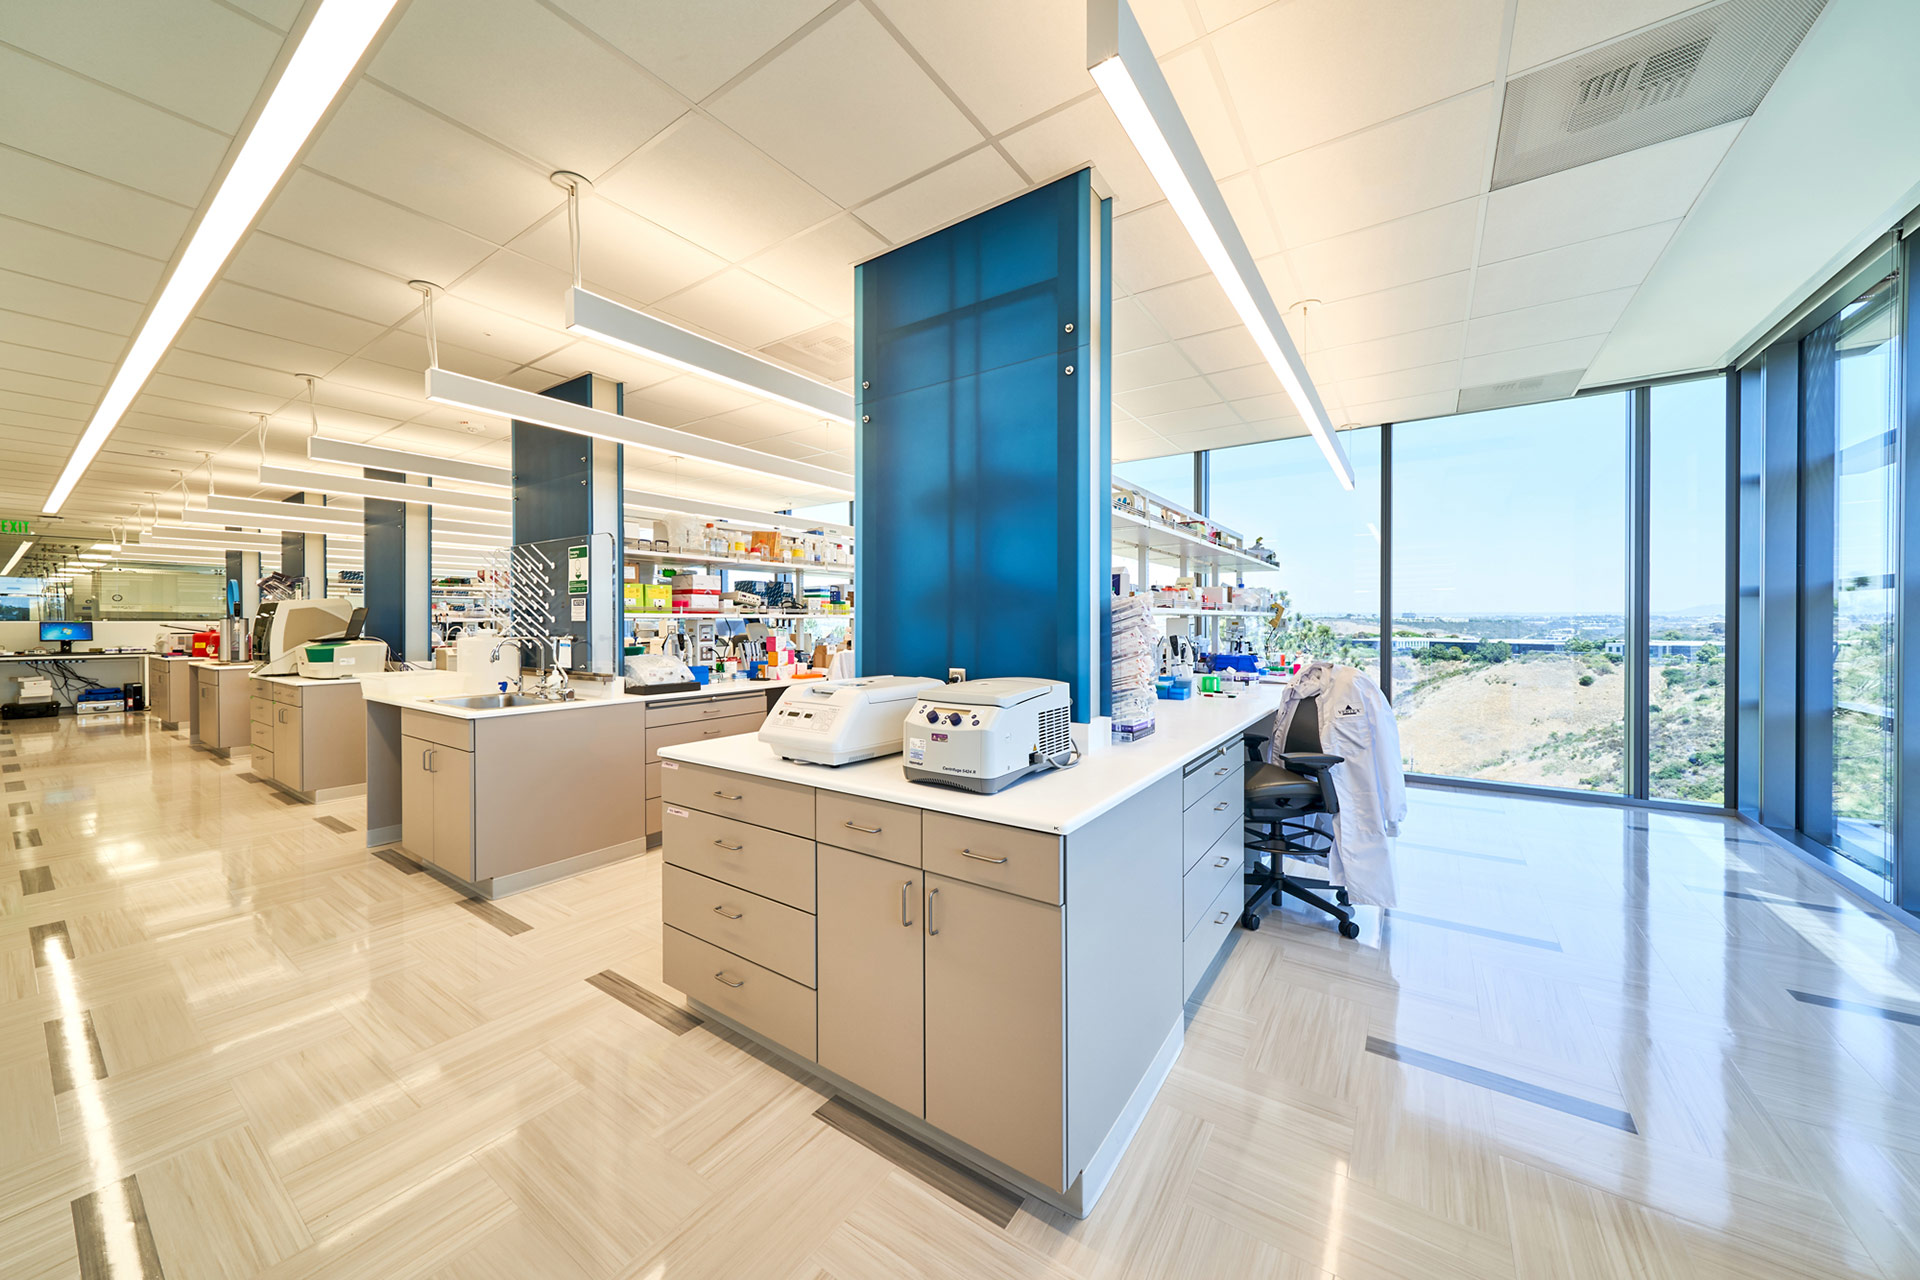 Interior at Vertex Pharmaceuticals life science facility, lab with equipment